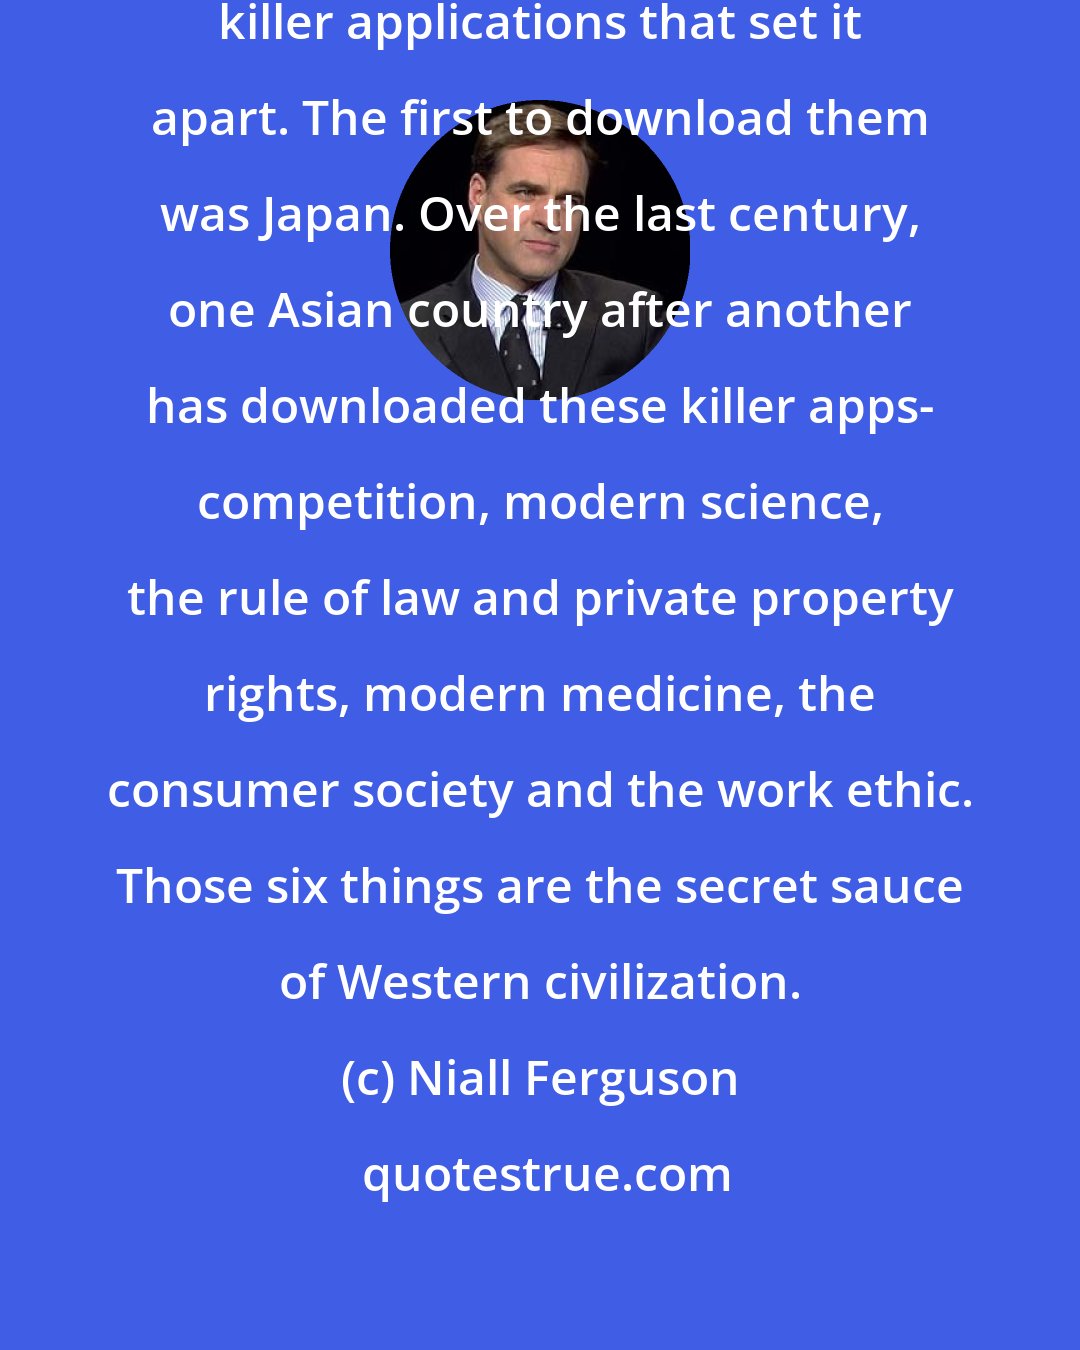 Niall Ferguson: For 500 years the West patented six killer applications that set it apart. The first to download them was Japan. Over the last century, one Asian country after another has downloaded these killer apps- competition, modern science, the rule of law and private property rights, modern medicine, the consumer society and the work ethic. Those six things are the secret sauce of Western civilization.